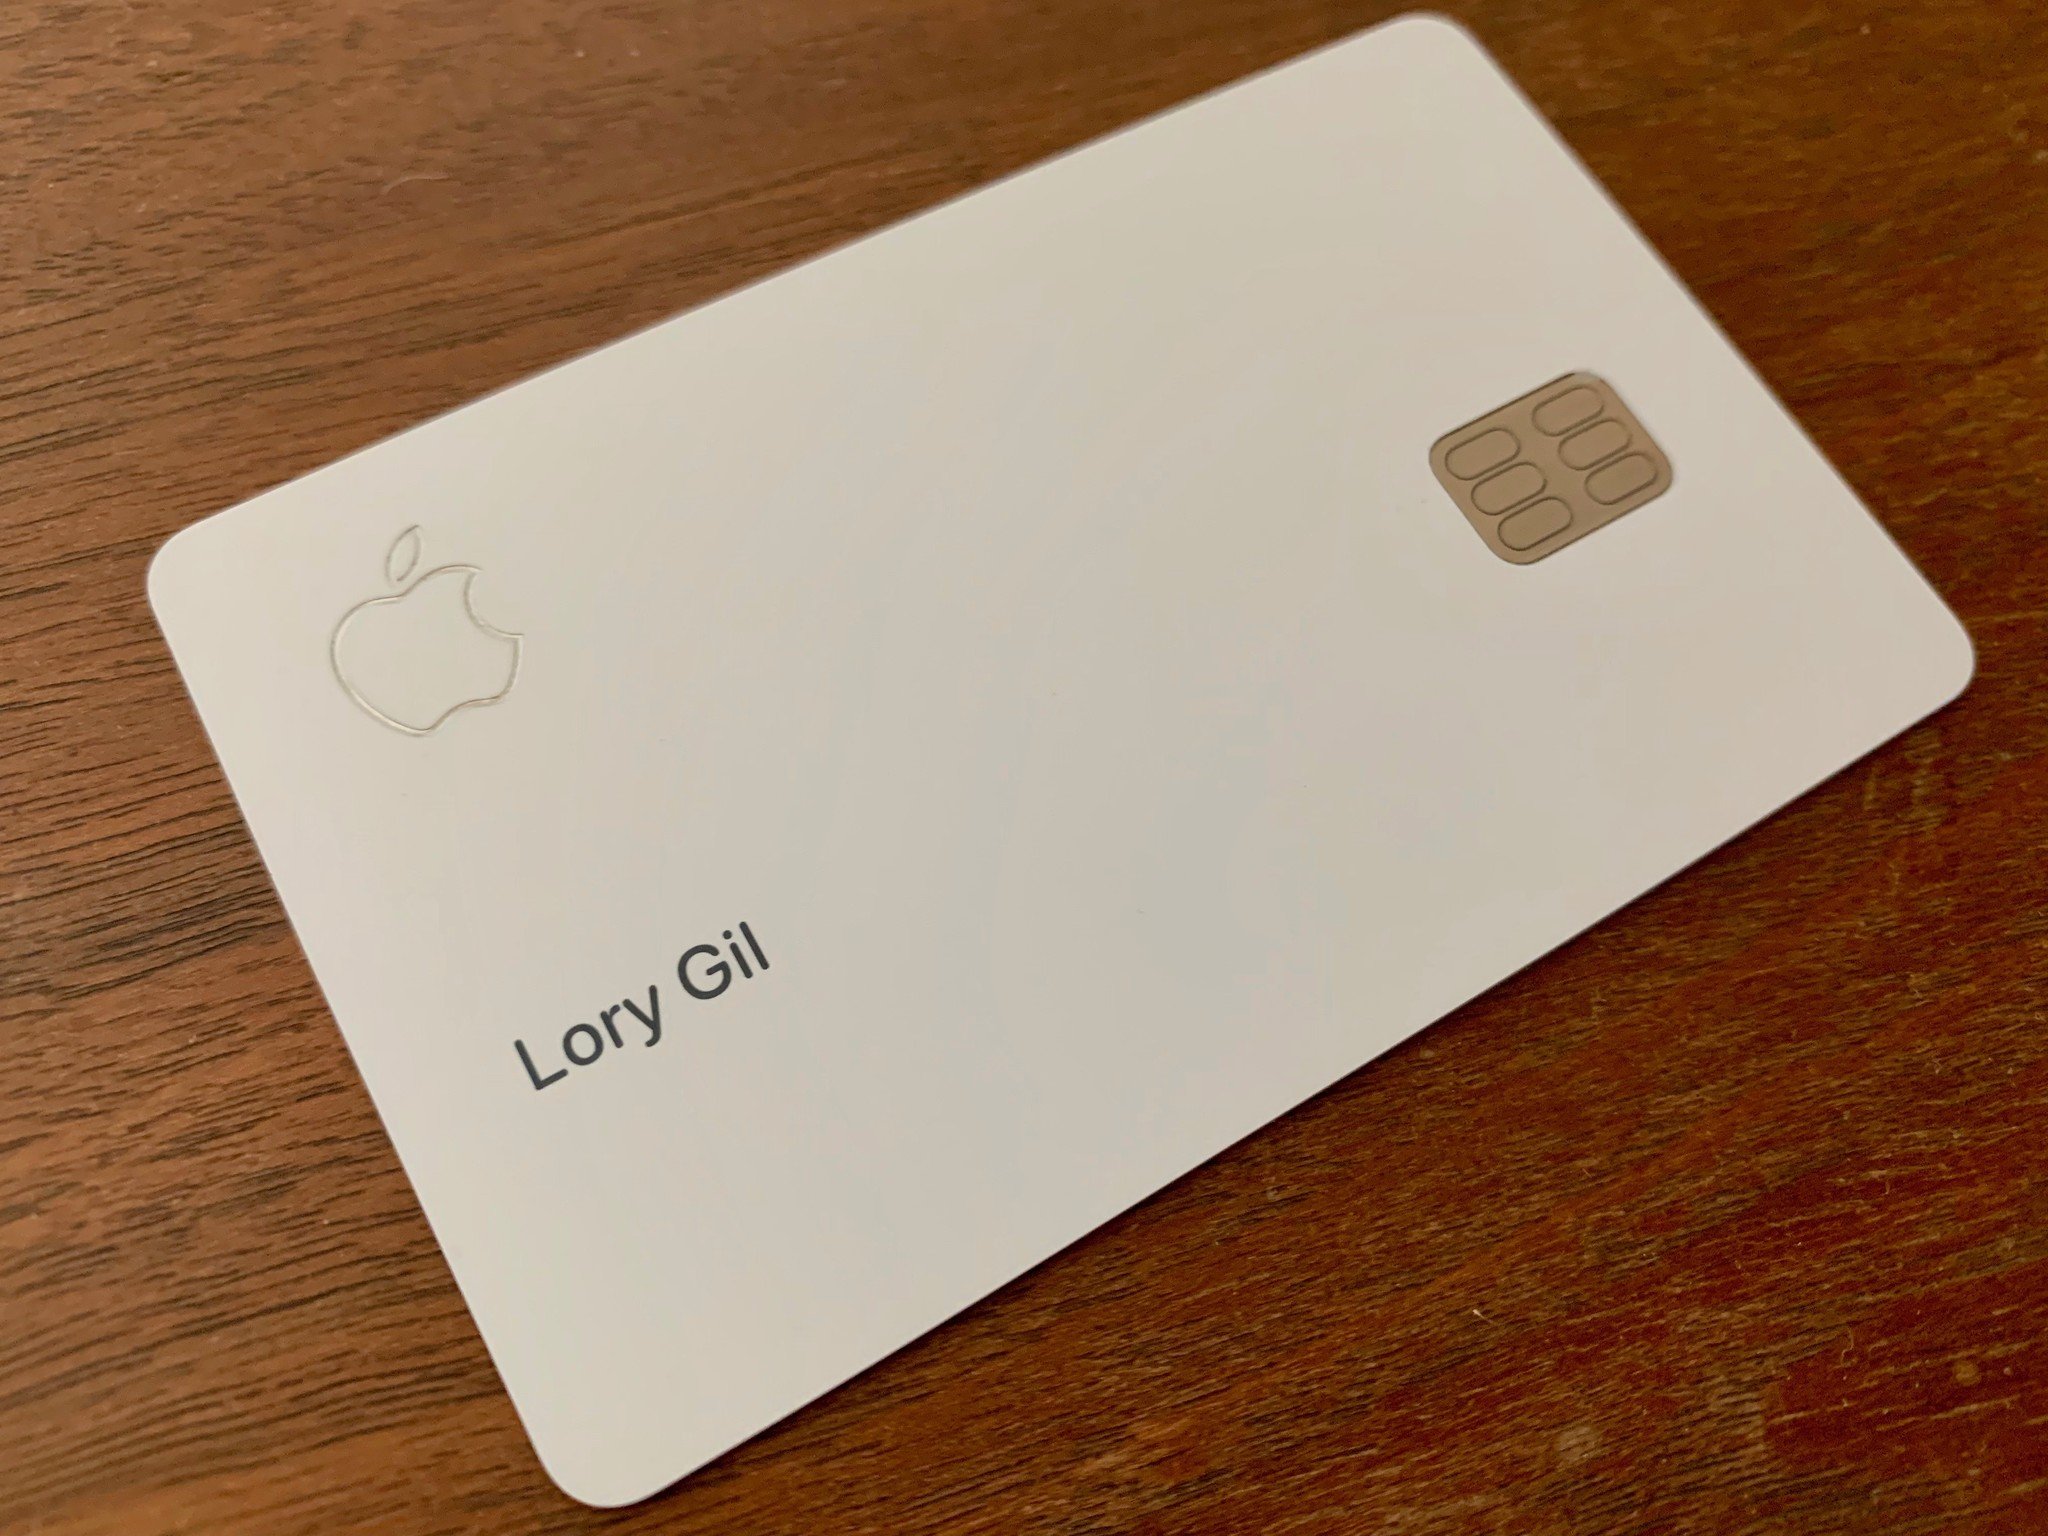 Leather wallets, loose change pose problems for new Apple Card